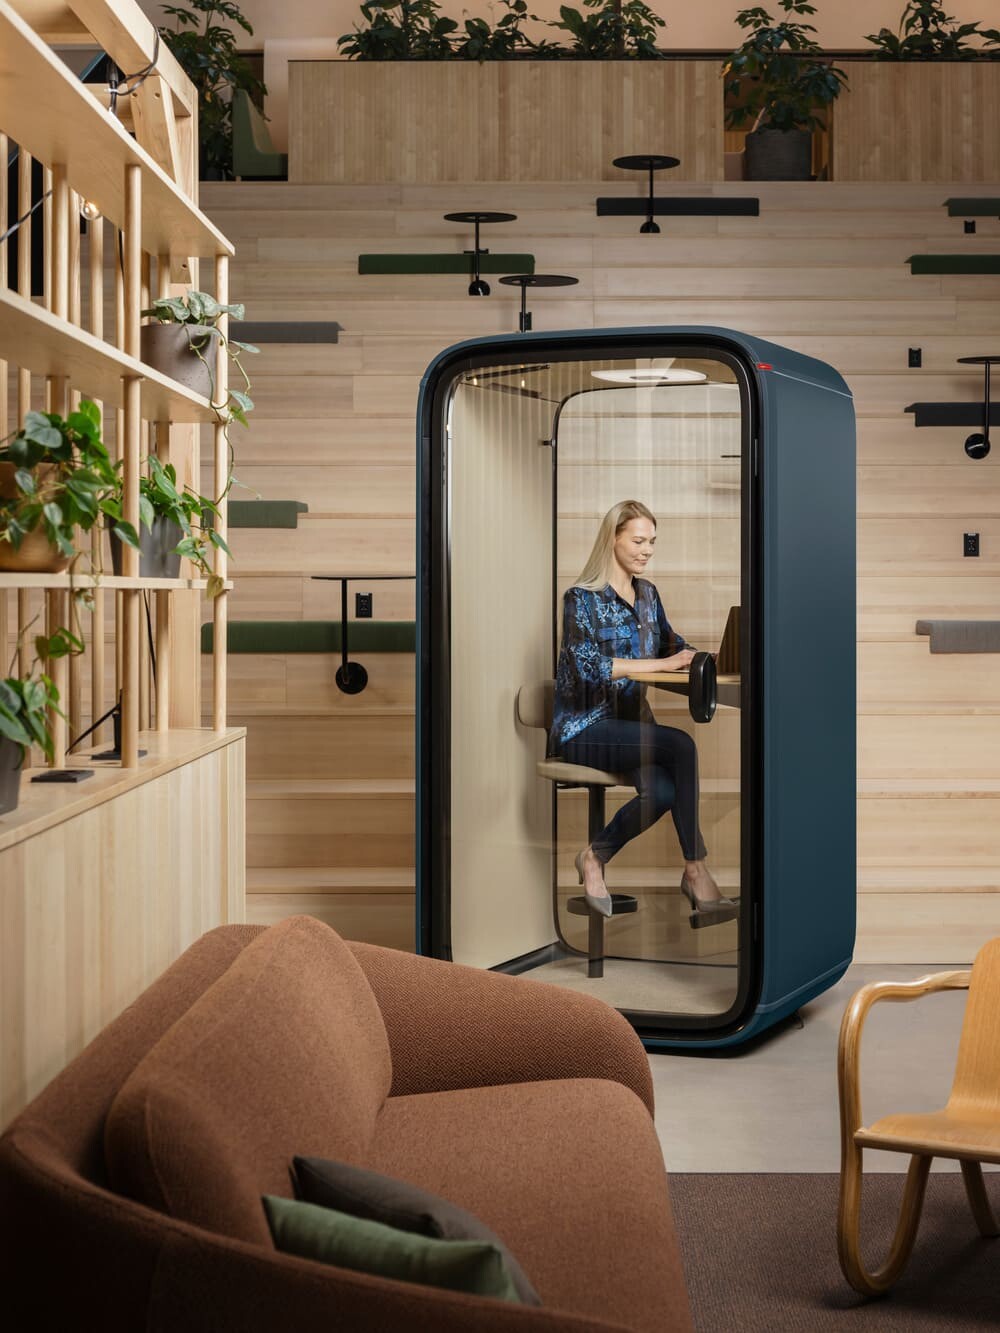 Framery Launches World’s First Connected Phone Booth